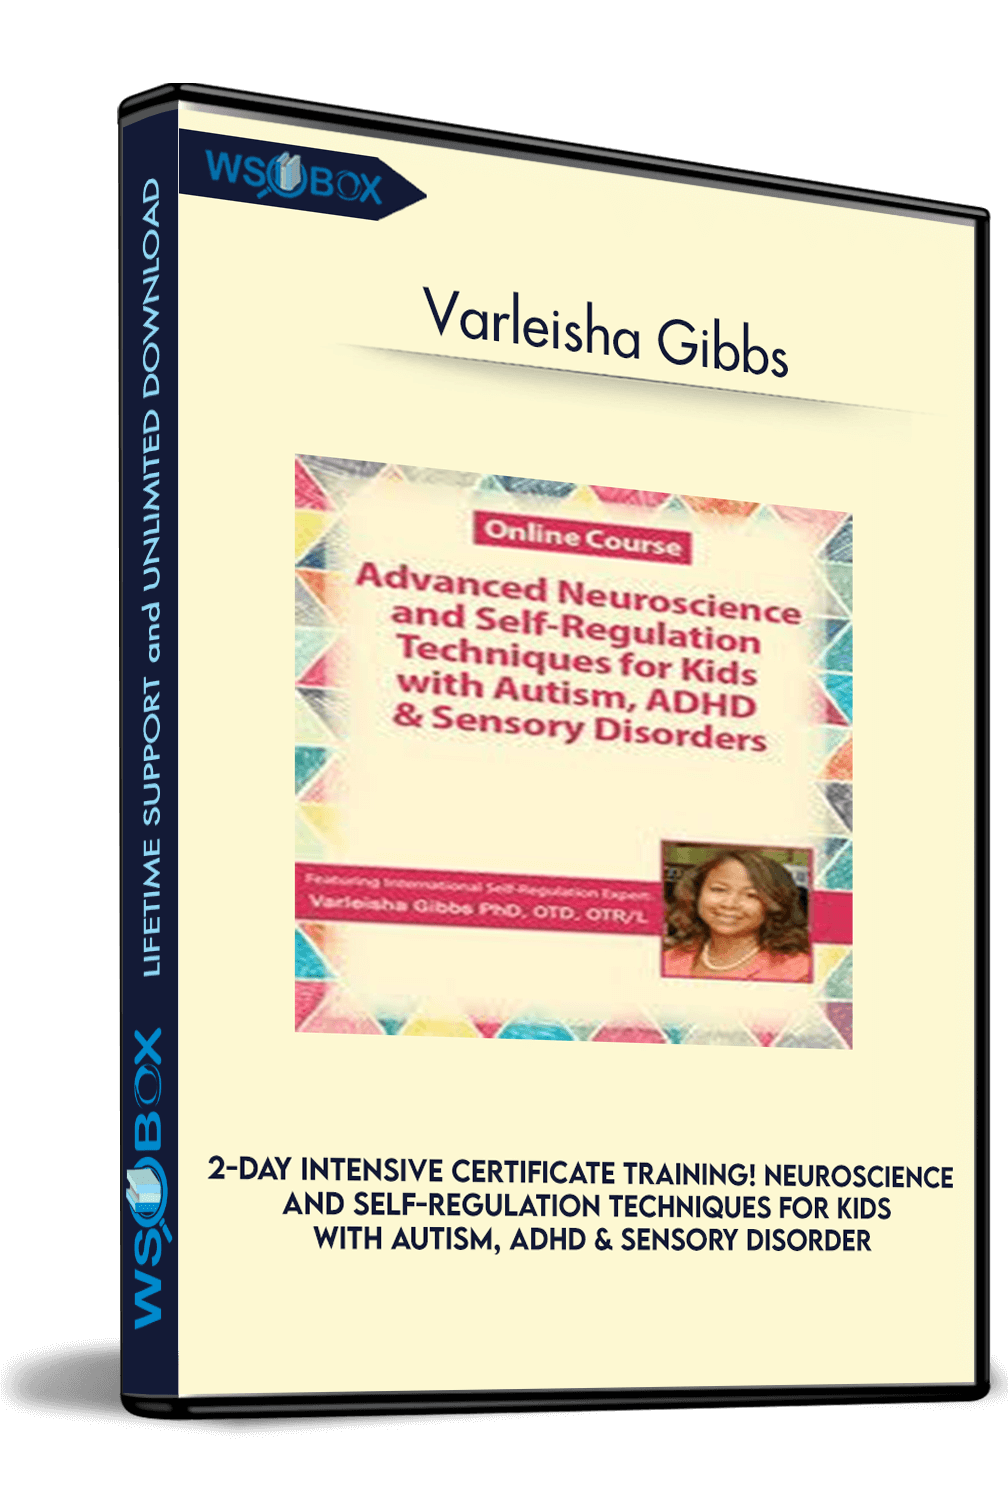 2-Day Intensive Certificate Training! Neuroscience and Self-Regulation Techniques for Kids with Autism, ADHD & Sensory Disorders – Varleisha Gibbs